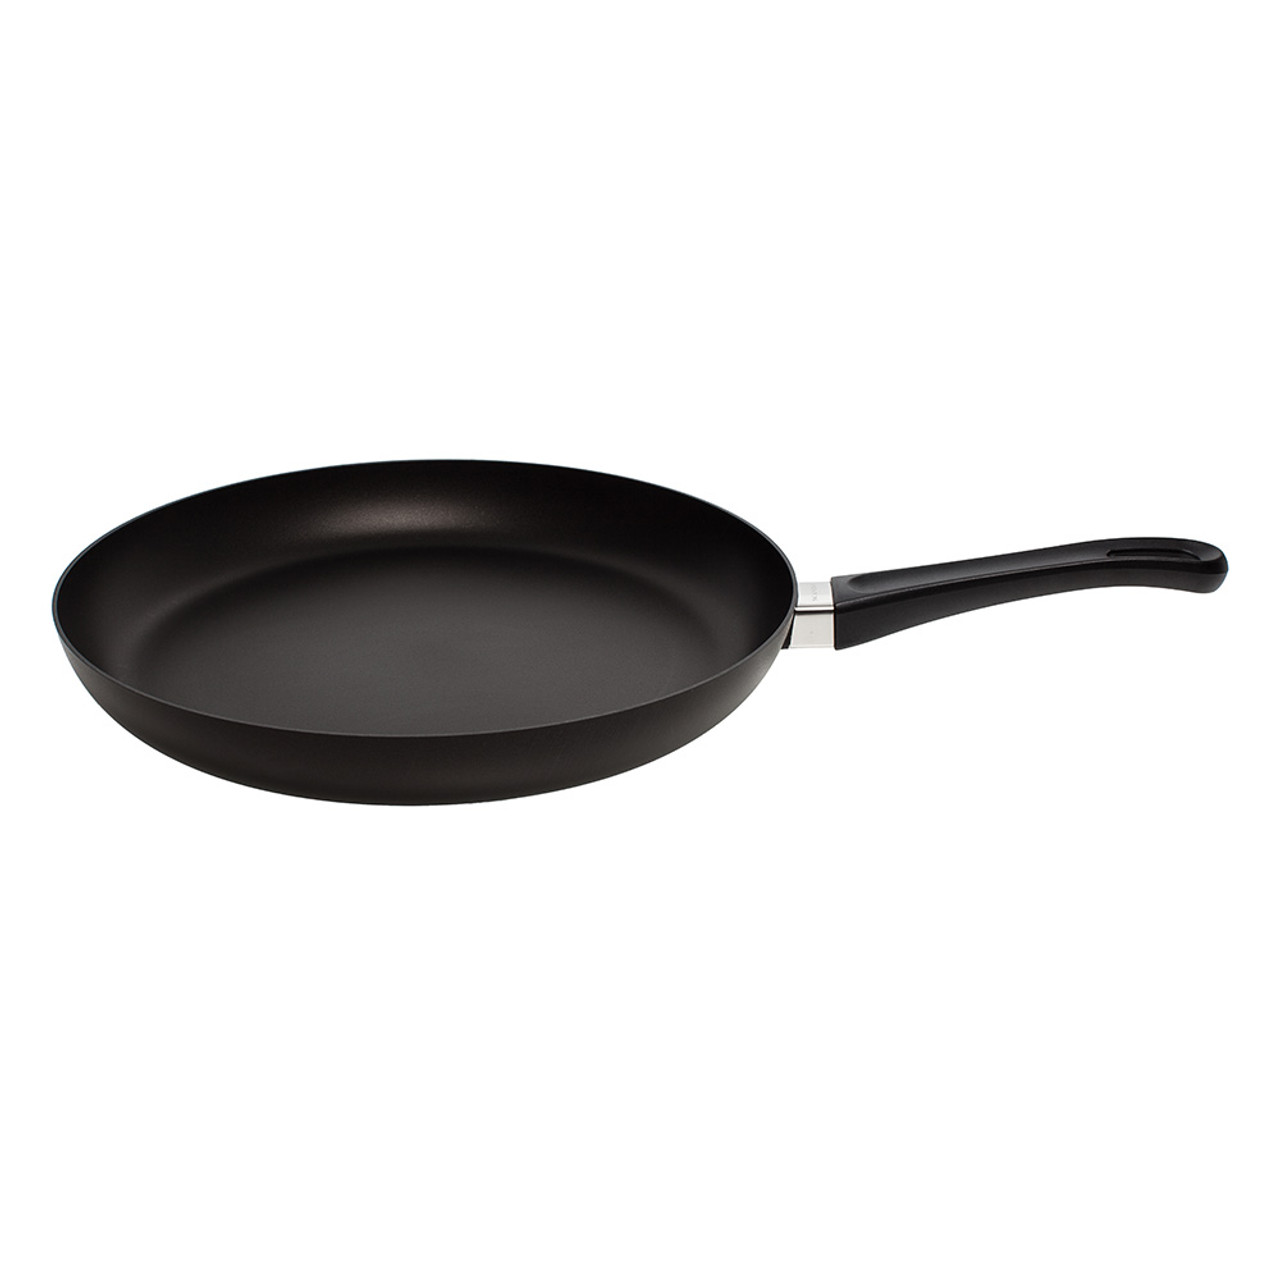 https://cdn11.bigcommerce.com/s-hccytny0od/images/stencil/1280x1280/products/431/4145/scanpan-classic-fry-pan-12.5-inch__97648.1594068748.jpg?c=2?imbypass=on